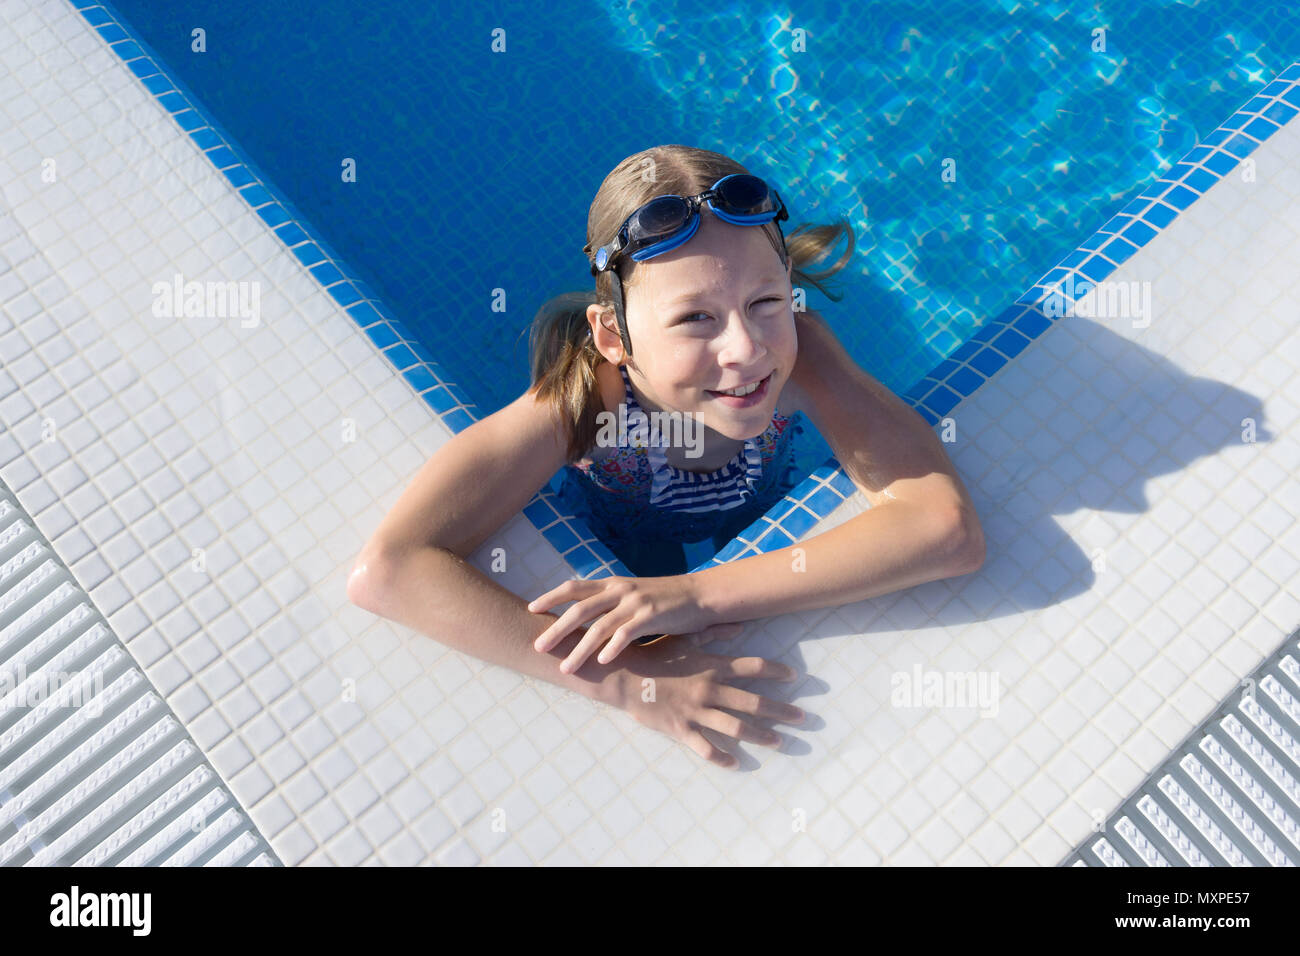 Female child looking up from corner of a swimming pool smiling Stock Photo